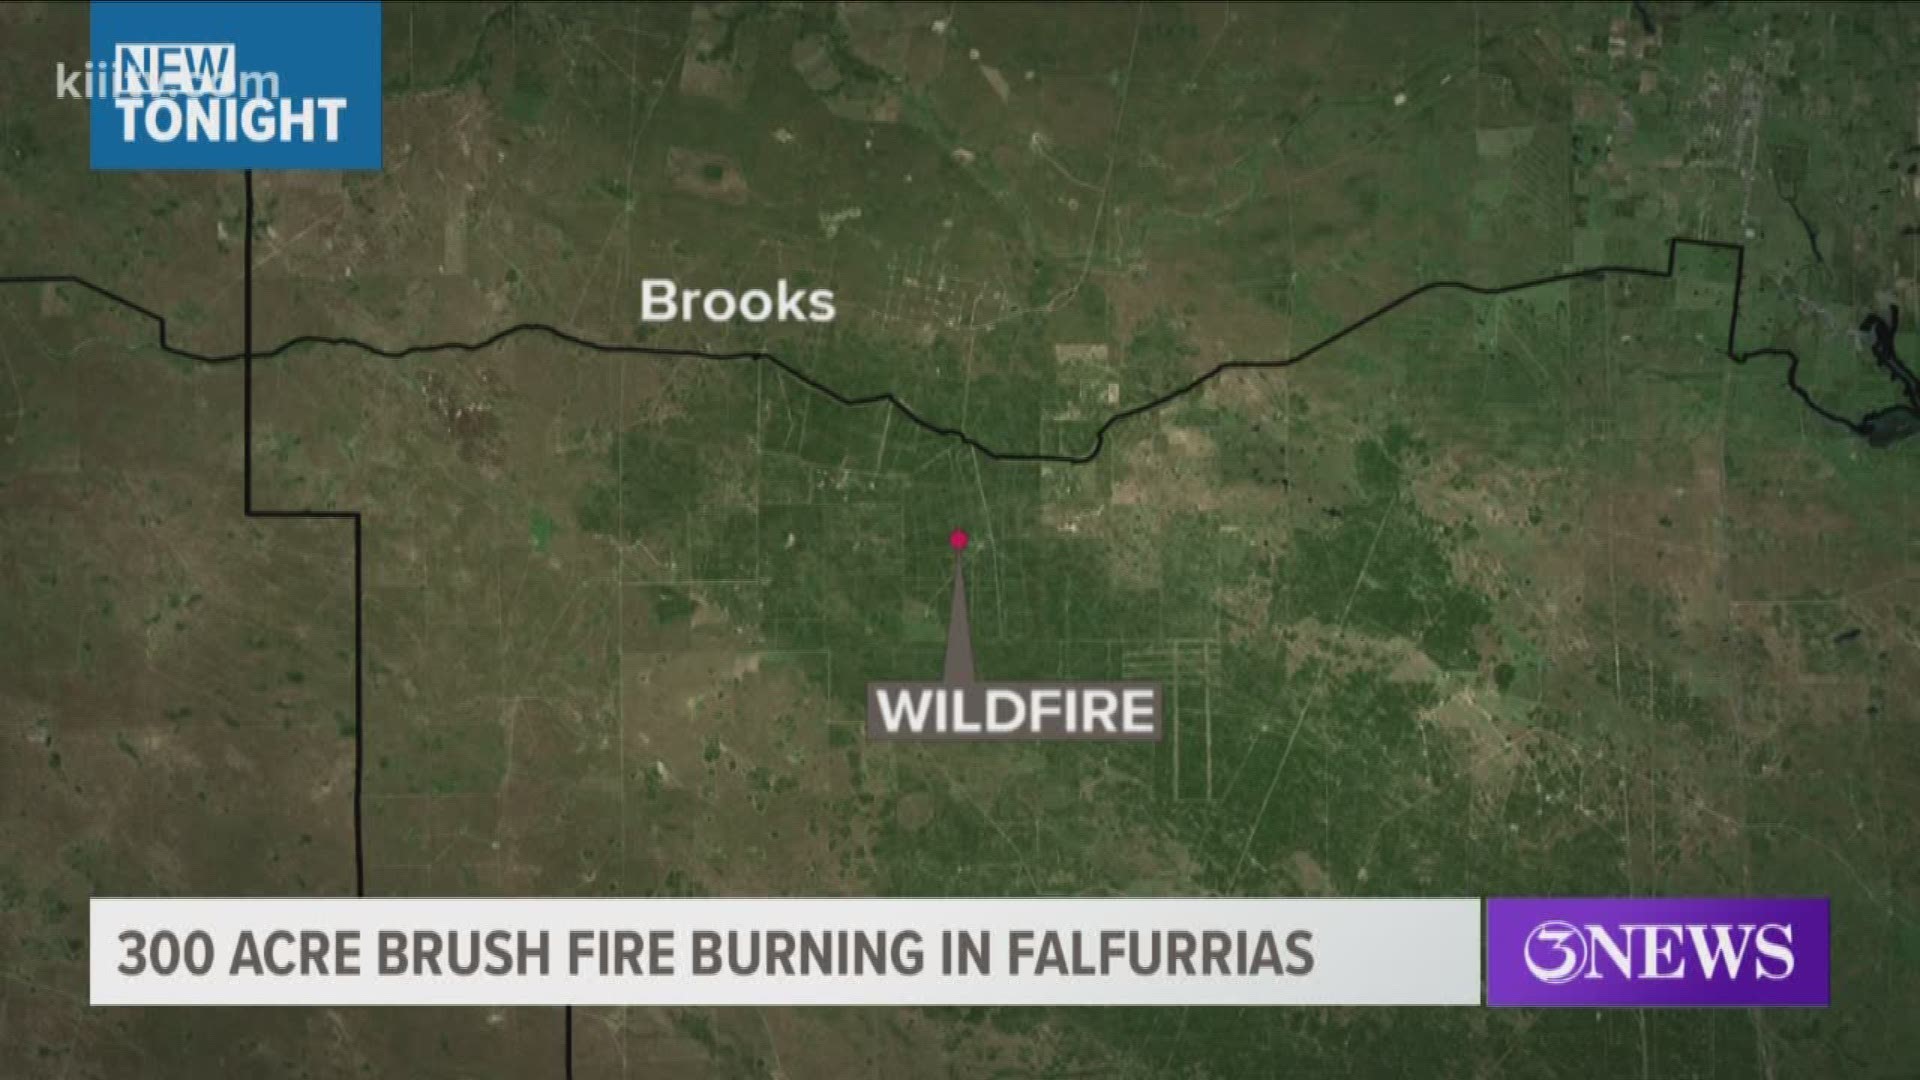 Crews are working to get a fire under control near Falfurrias that has burned around 350 acres.